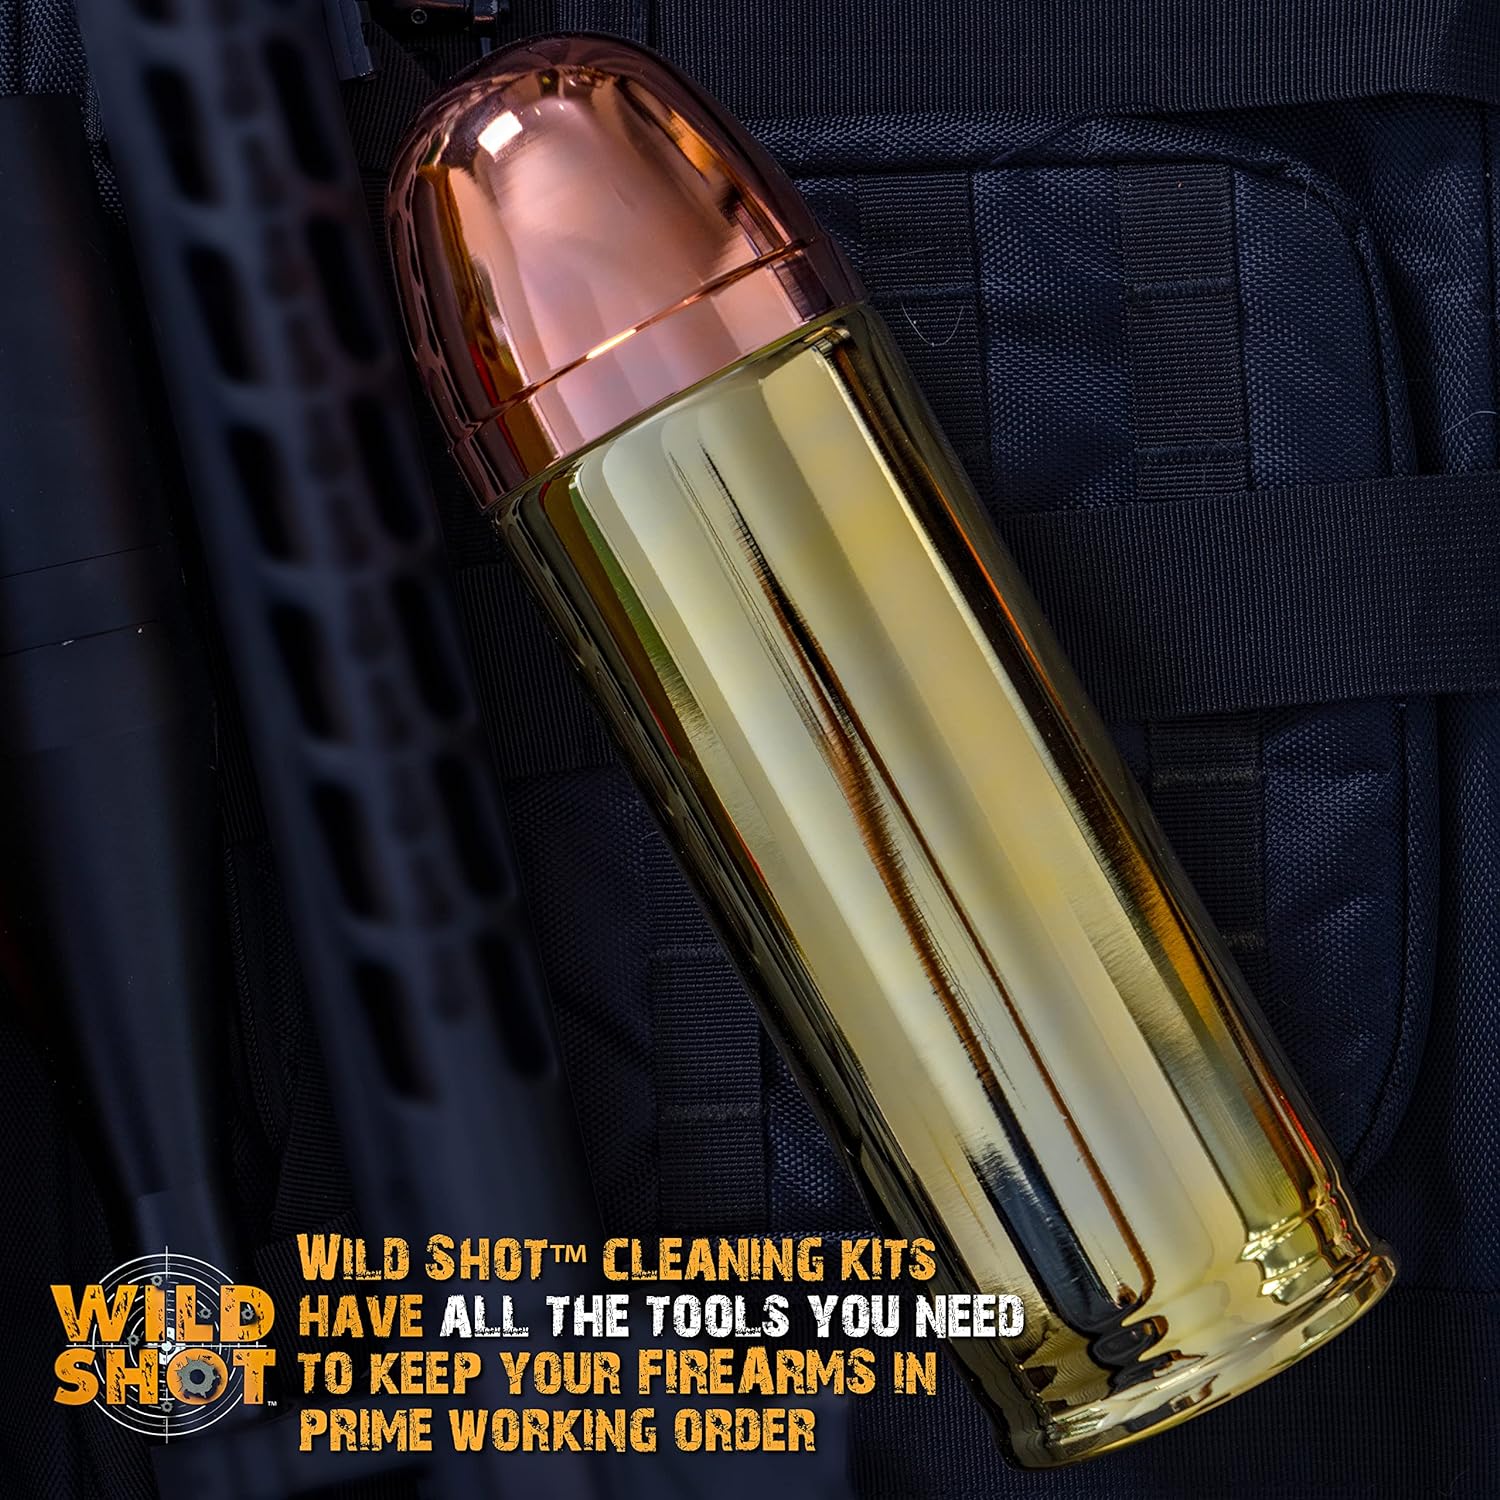 Wild Shot Deluxe Gun Cleaning Kit in Registered Trademarked Bullet-Shaped Case